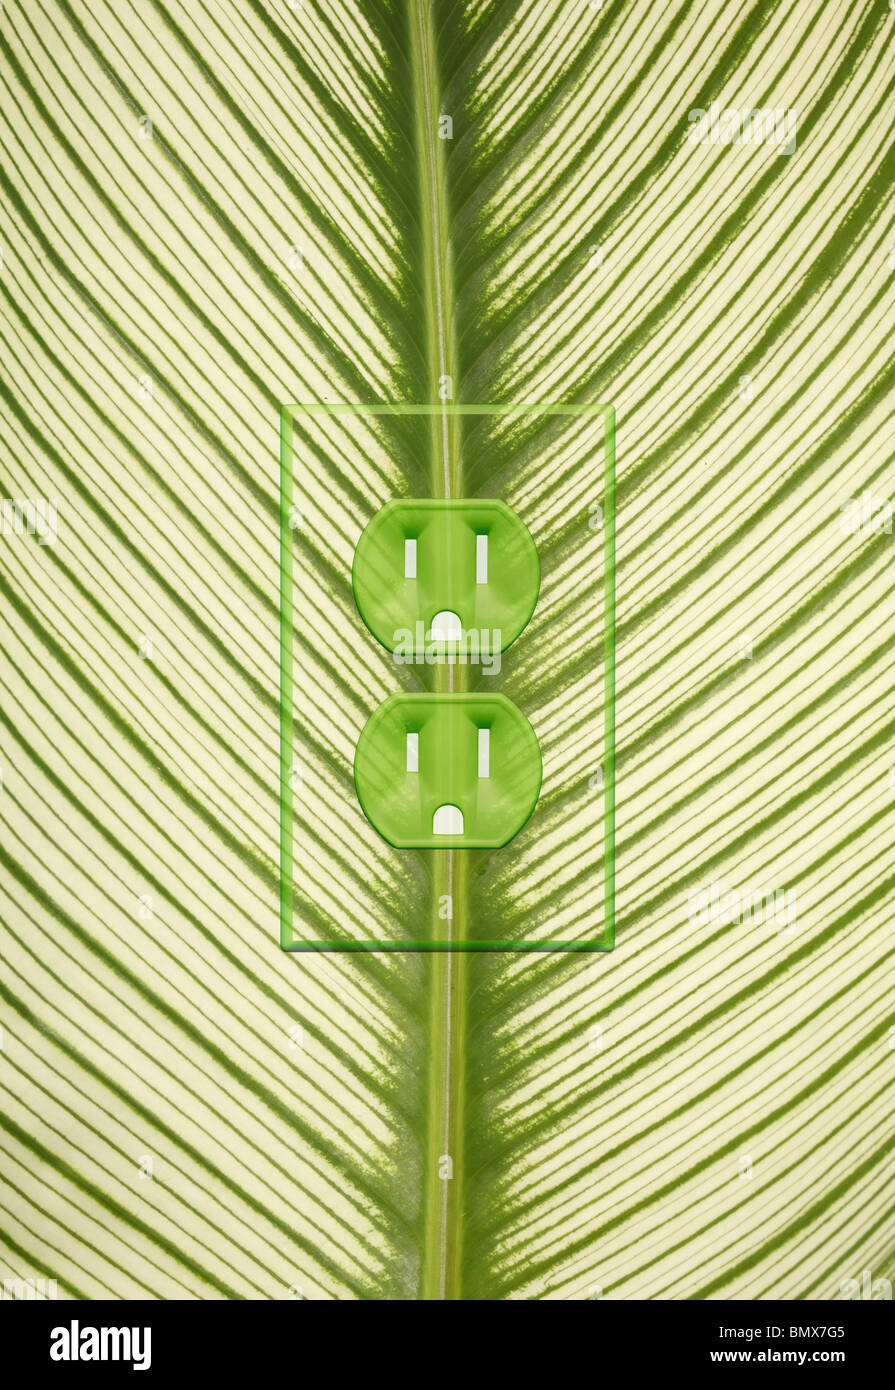 A green plant leaf with an electrical power outlet on the spine Stock Photo